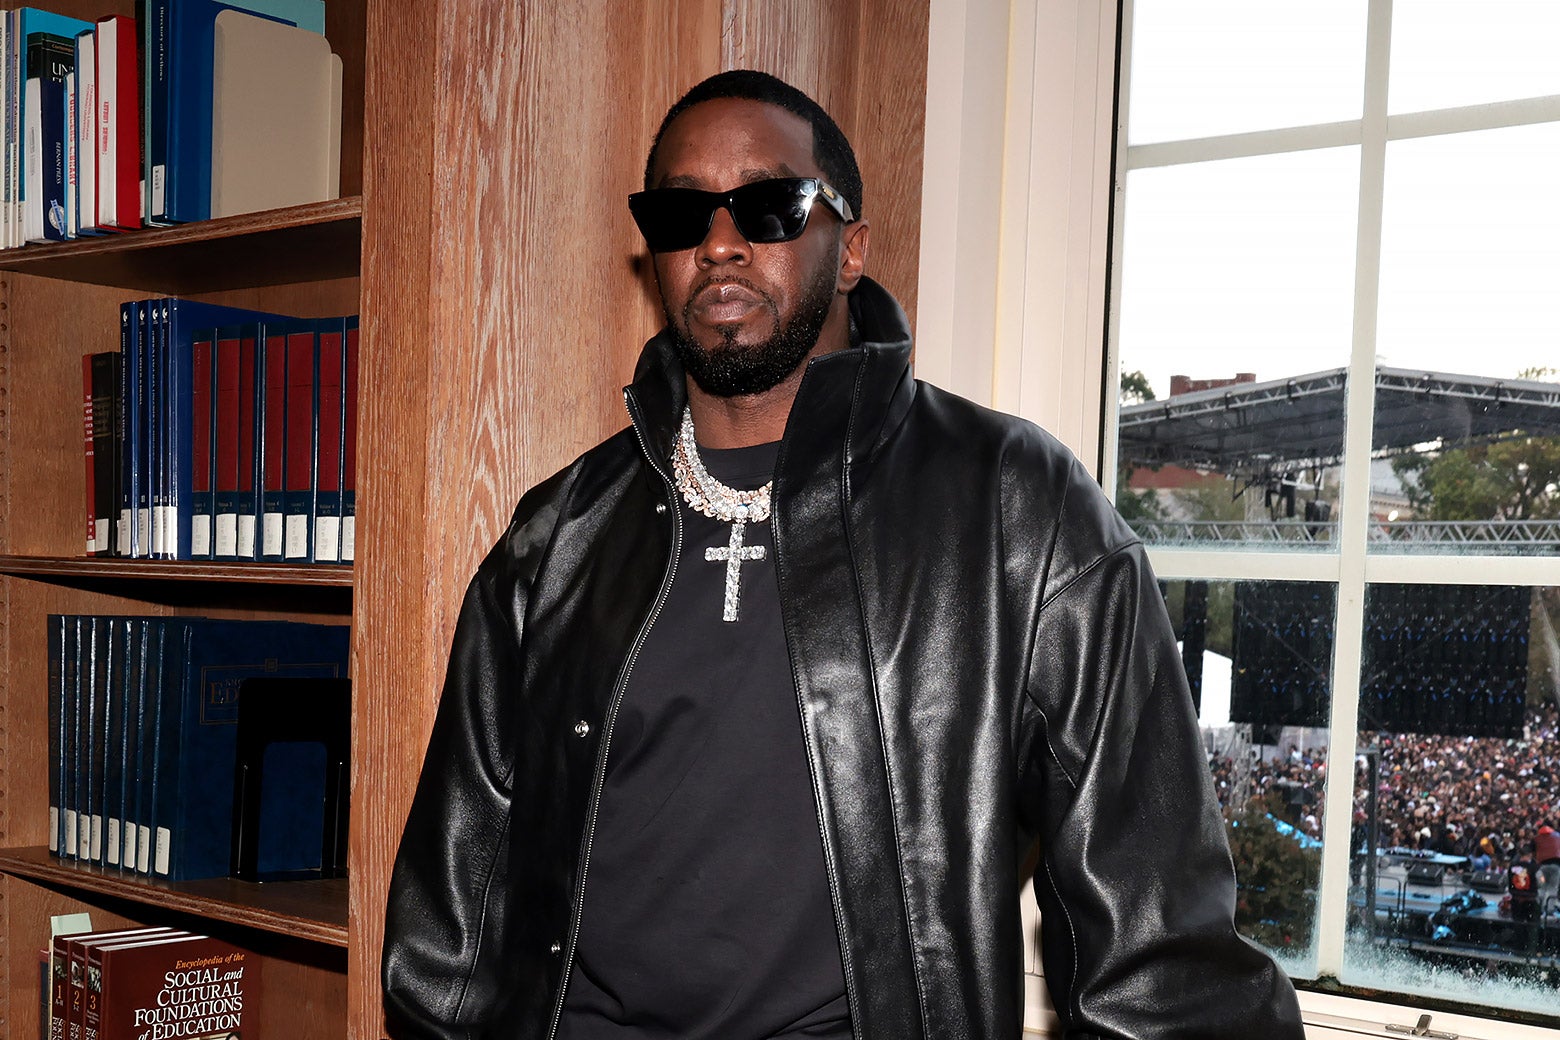 Diddy wears sunglasses, a black leather jacket, and a black T-shirt and frowns in front of a bookcase.